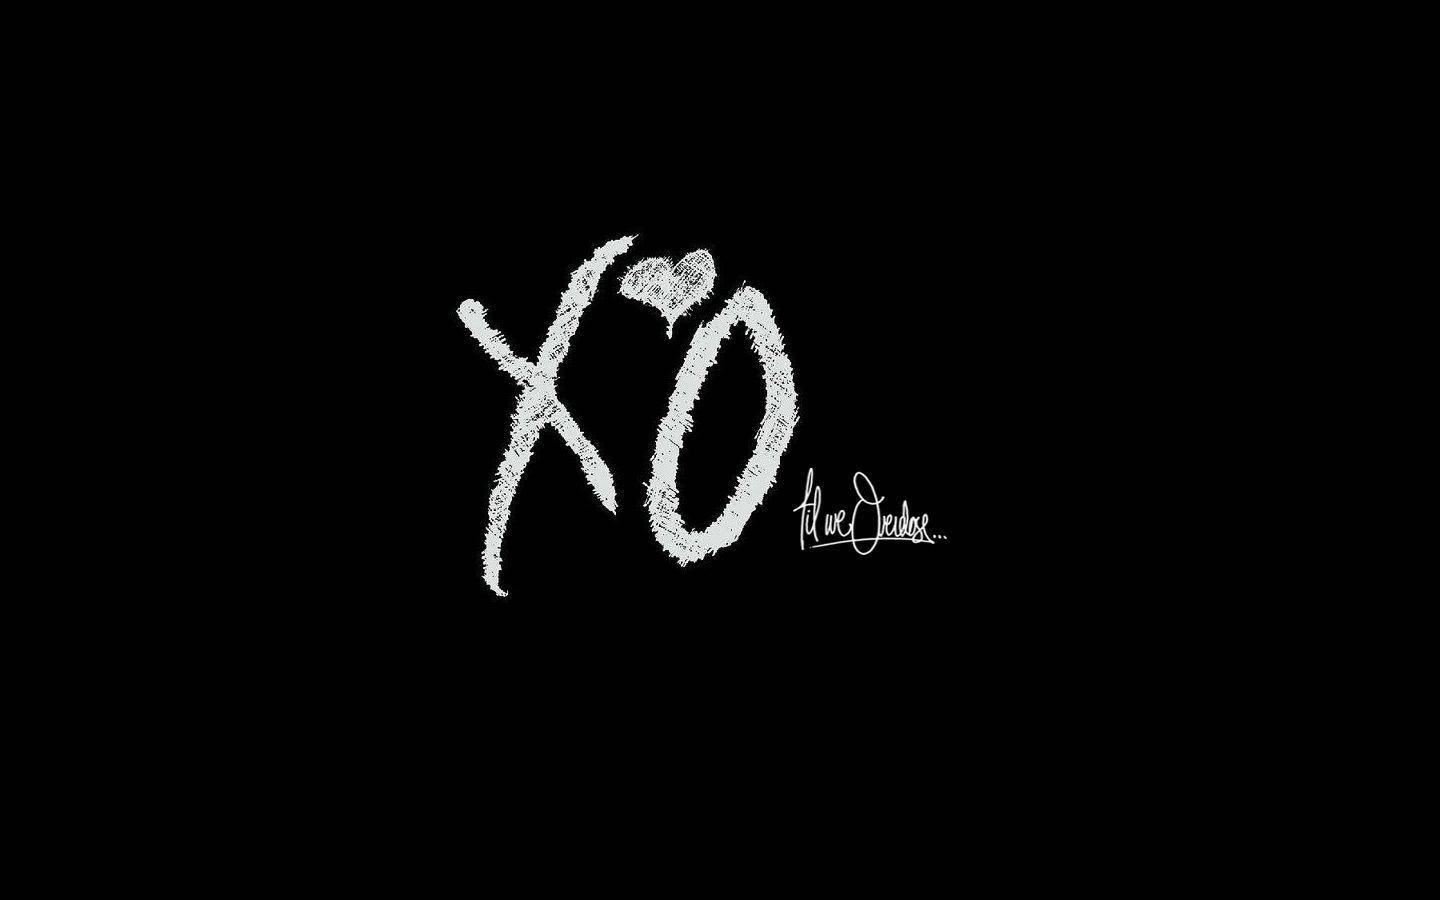 A Black Background With The Word Xo Written On It Background